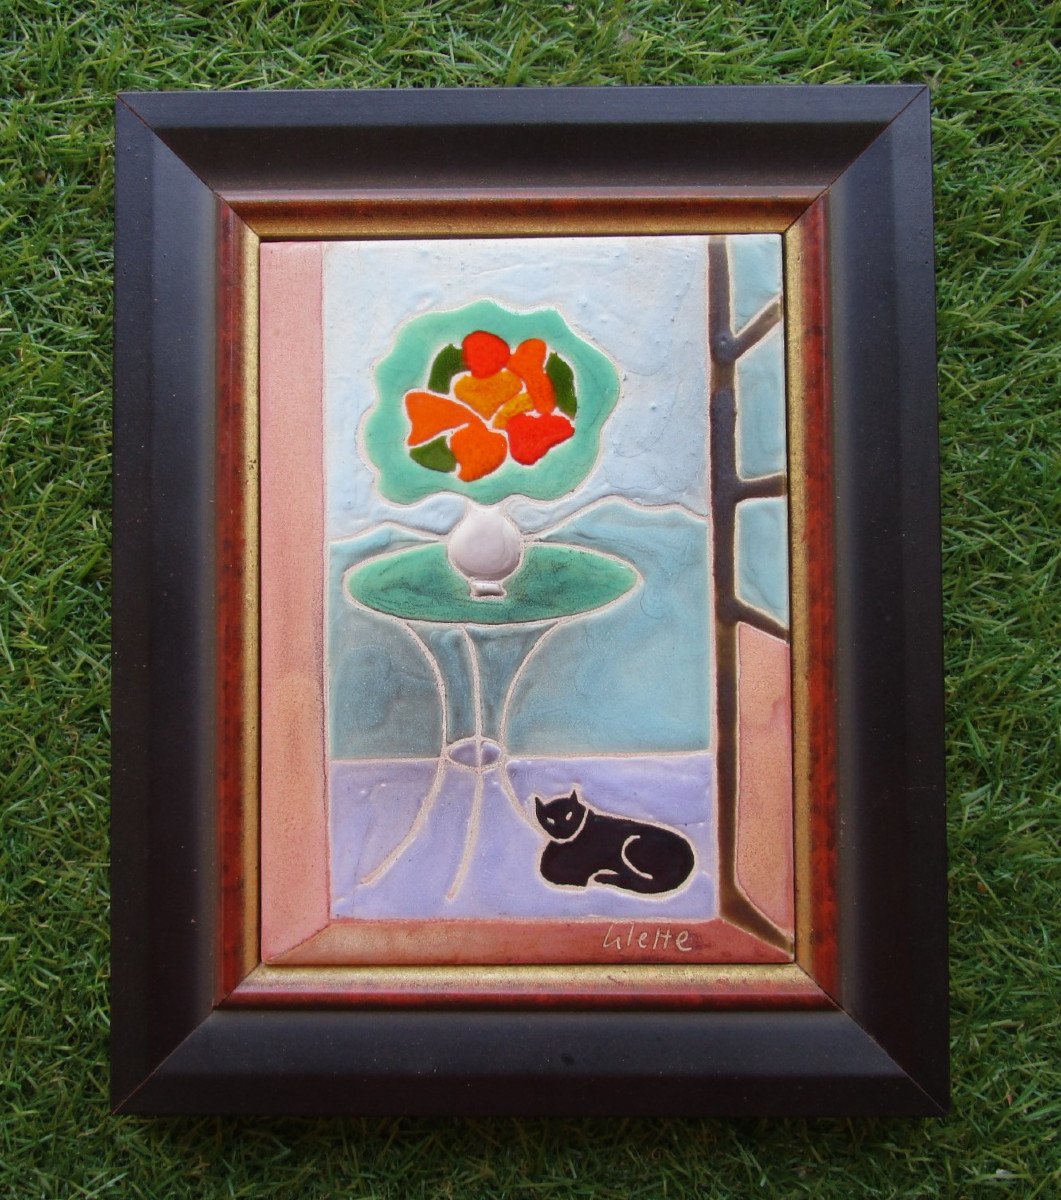 Lilette And Gilbert Valentin Les Archanges Vallauris Ceramic Painting Flowers And Black Cat.